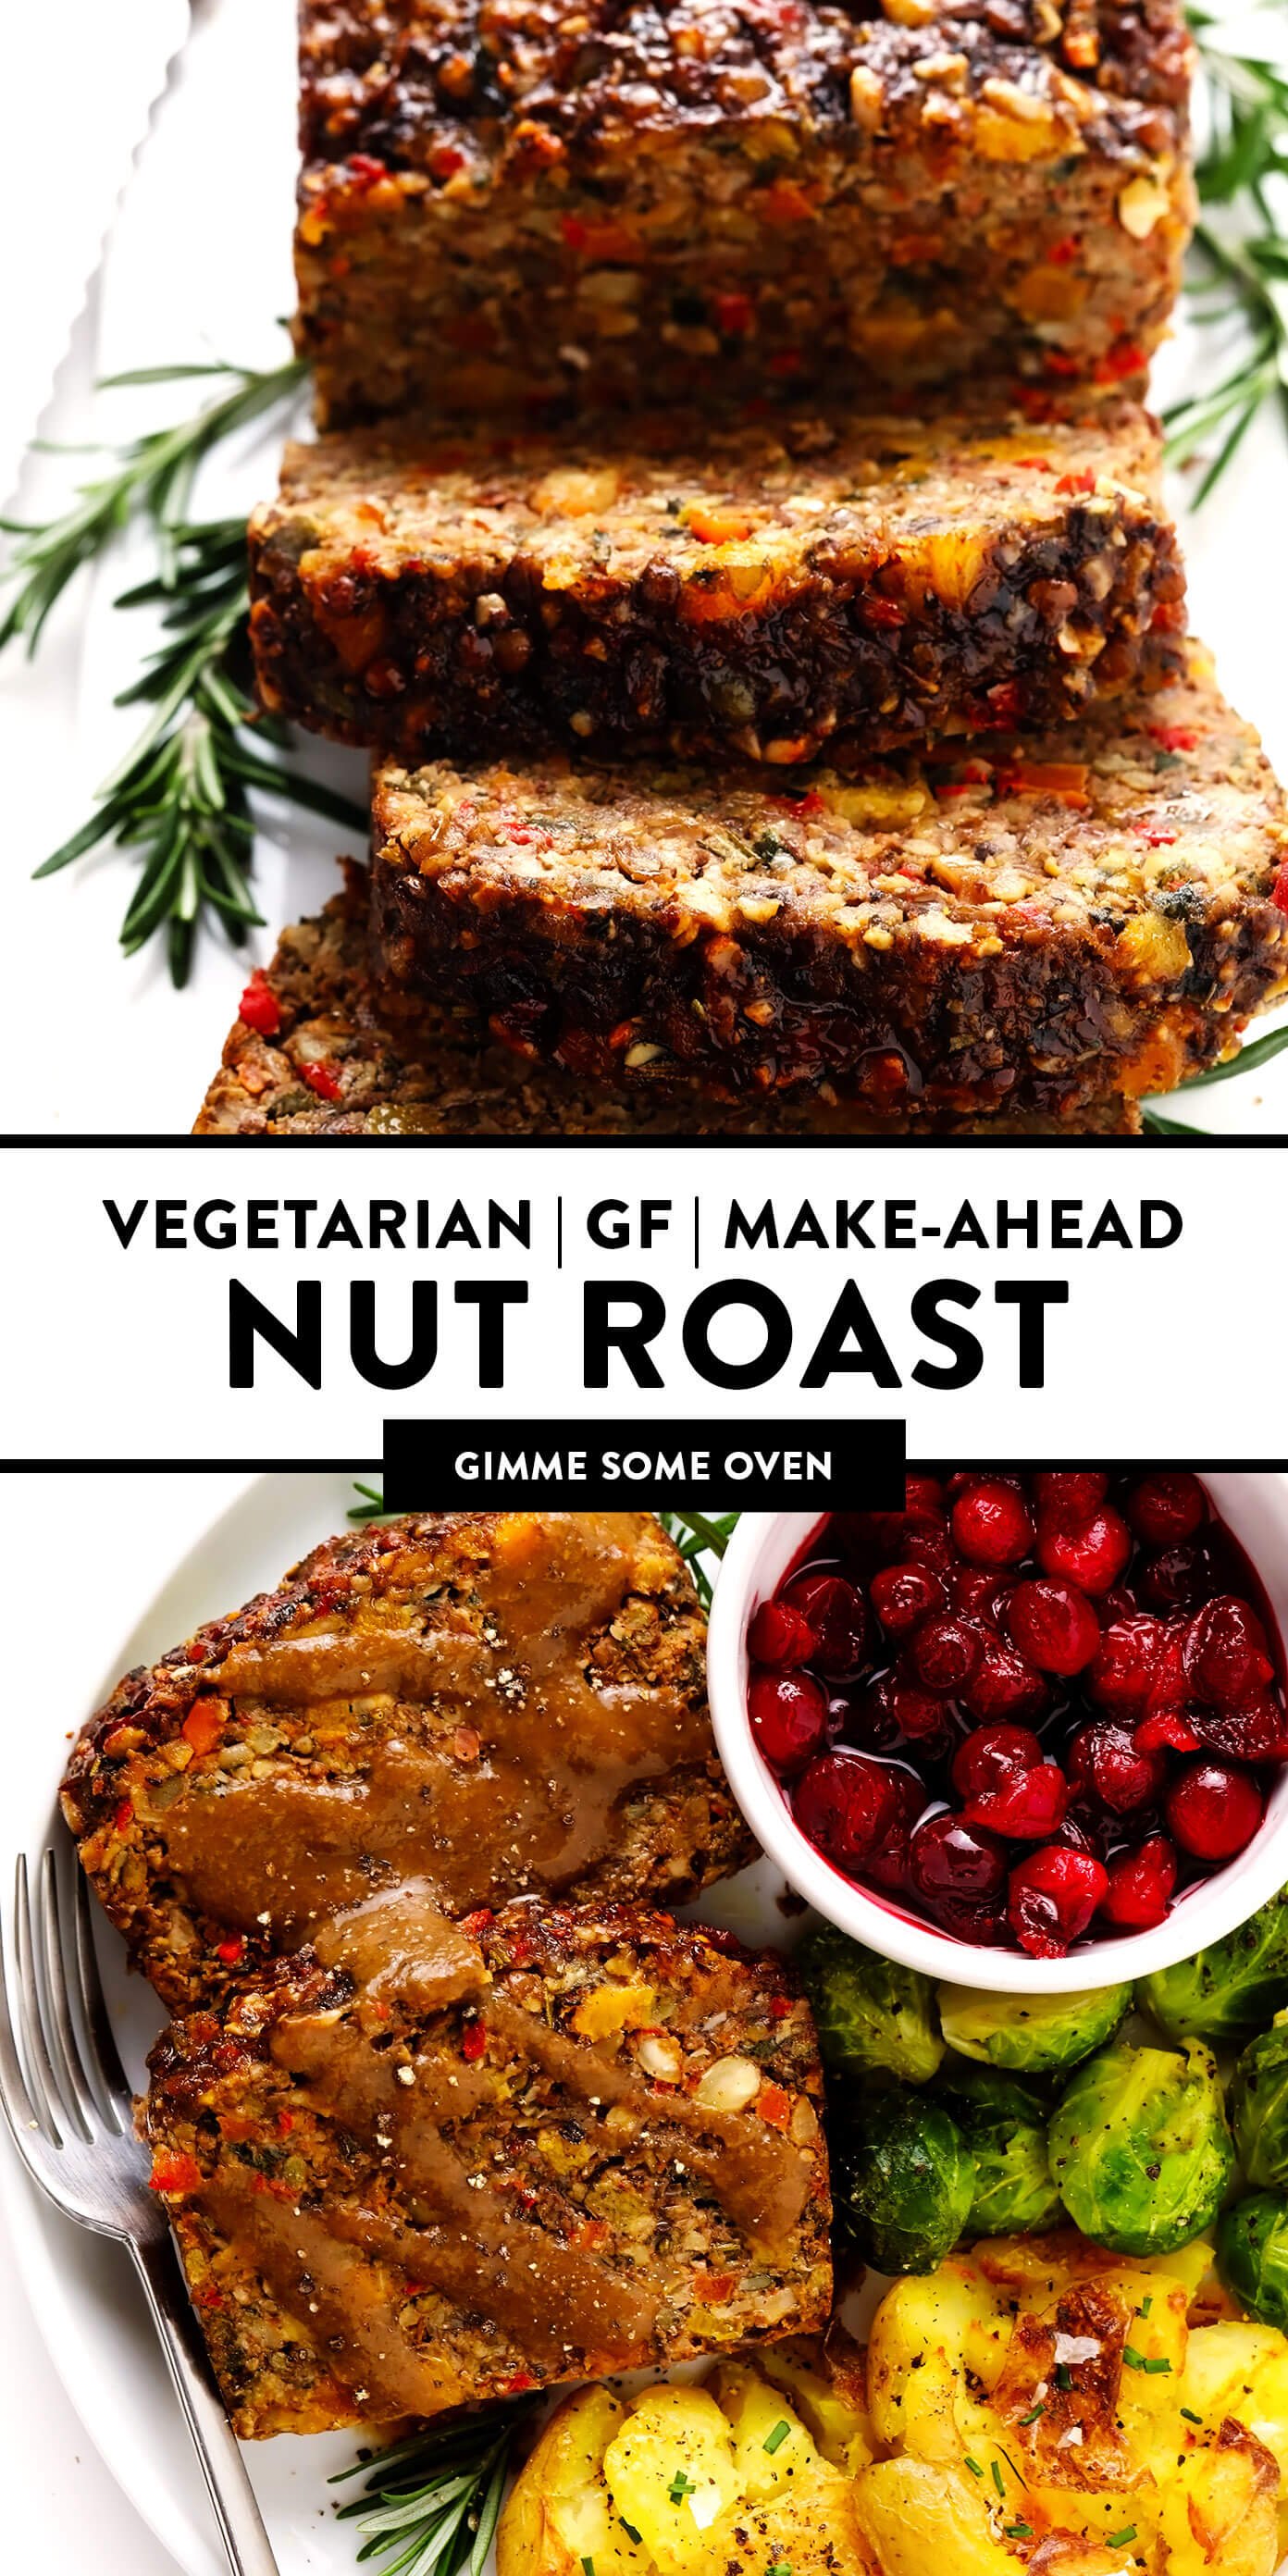 Amazing Nut Roast Recipe! - Gimme Some Oven